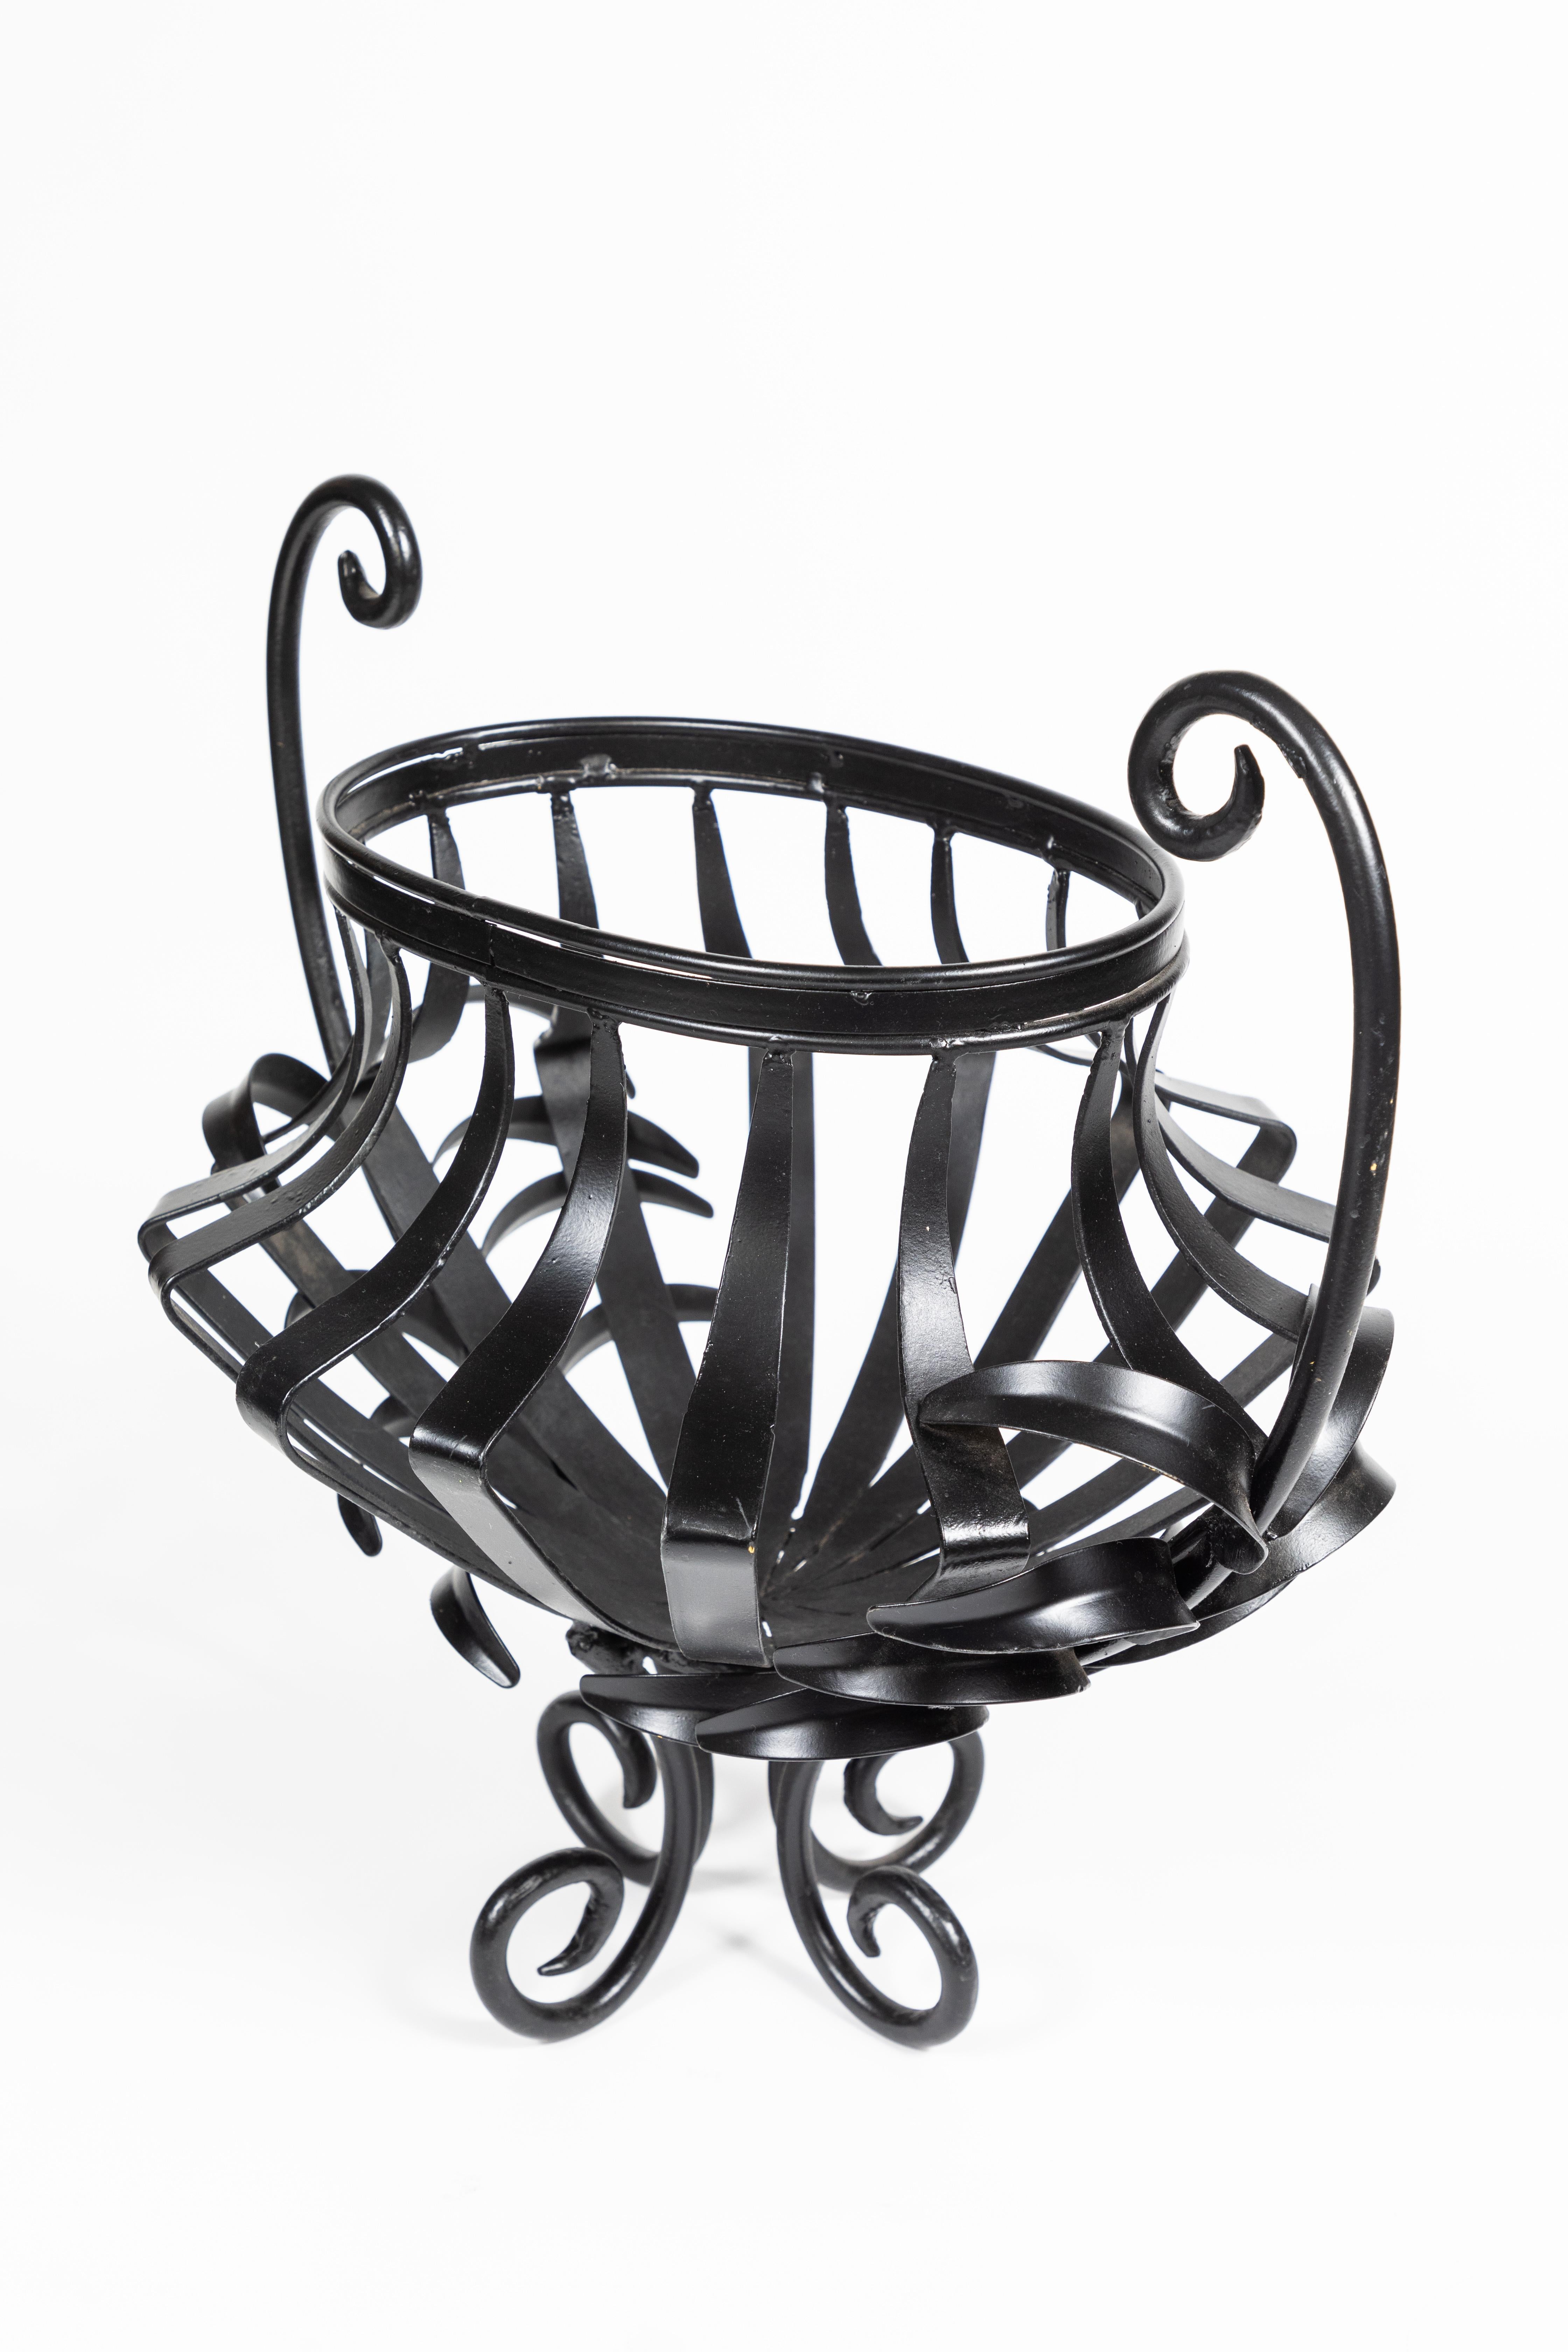 Lacquered 1940s Oval Wrought Iron Urn Planter